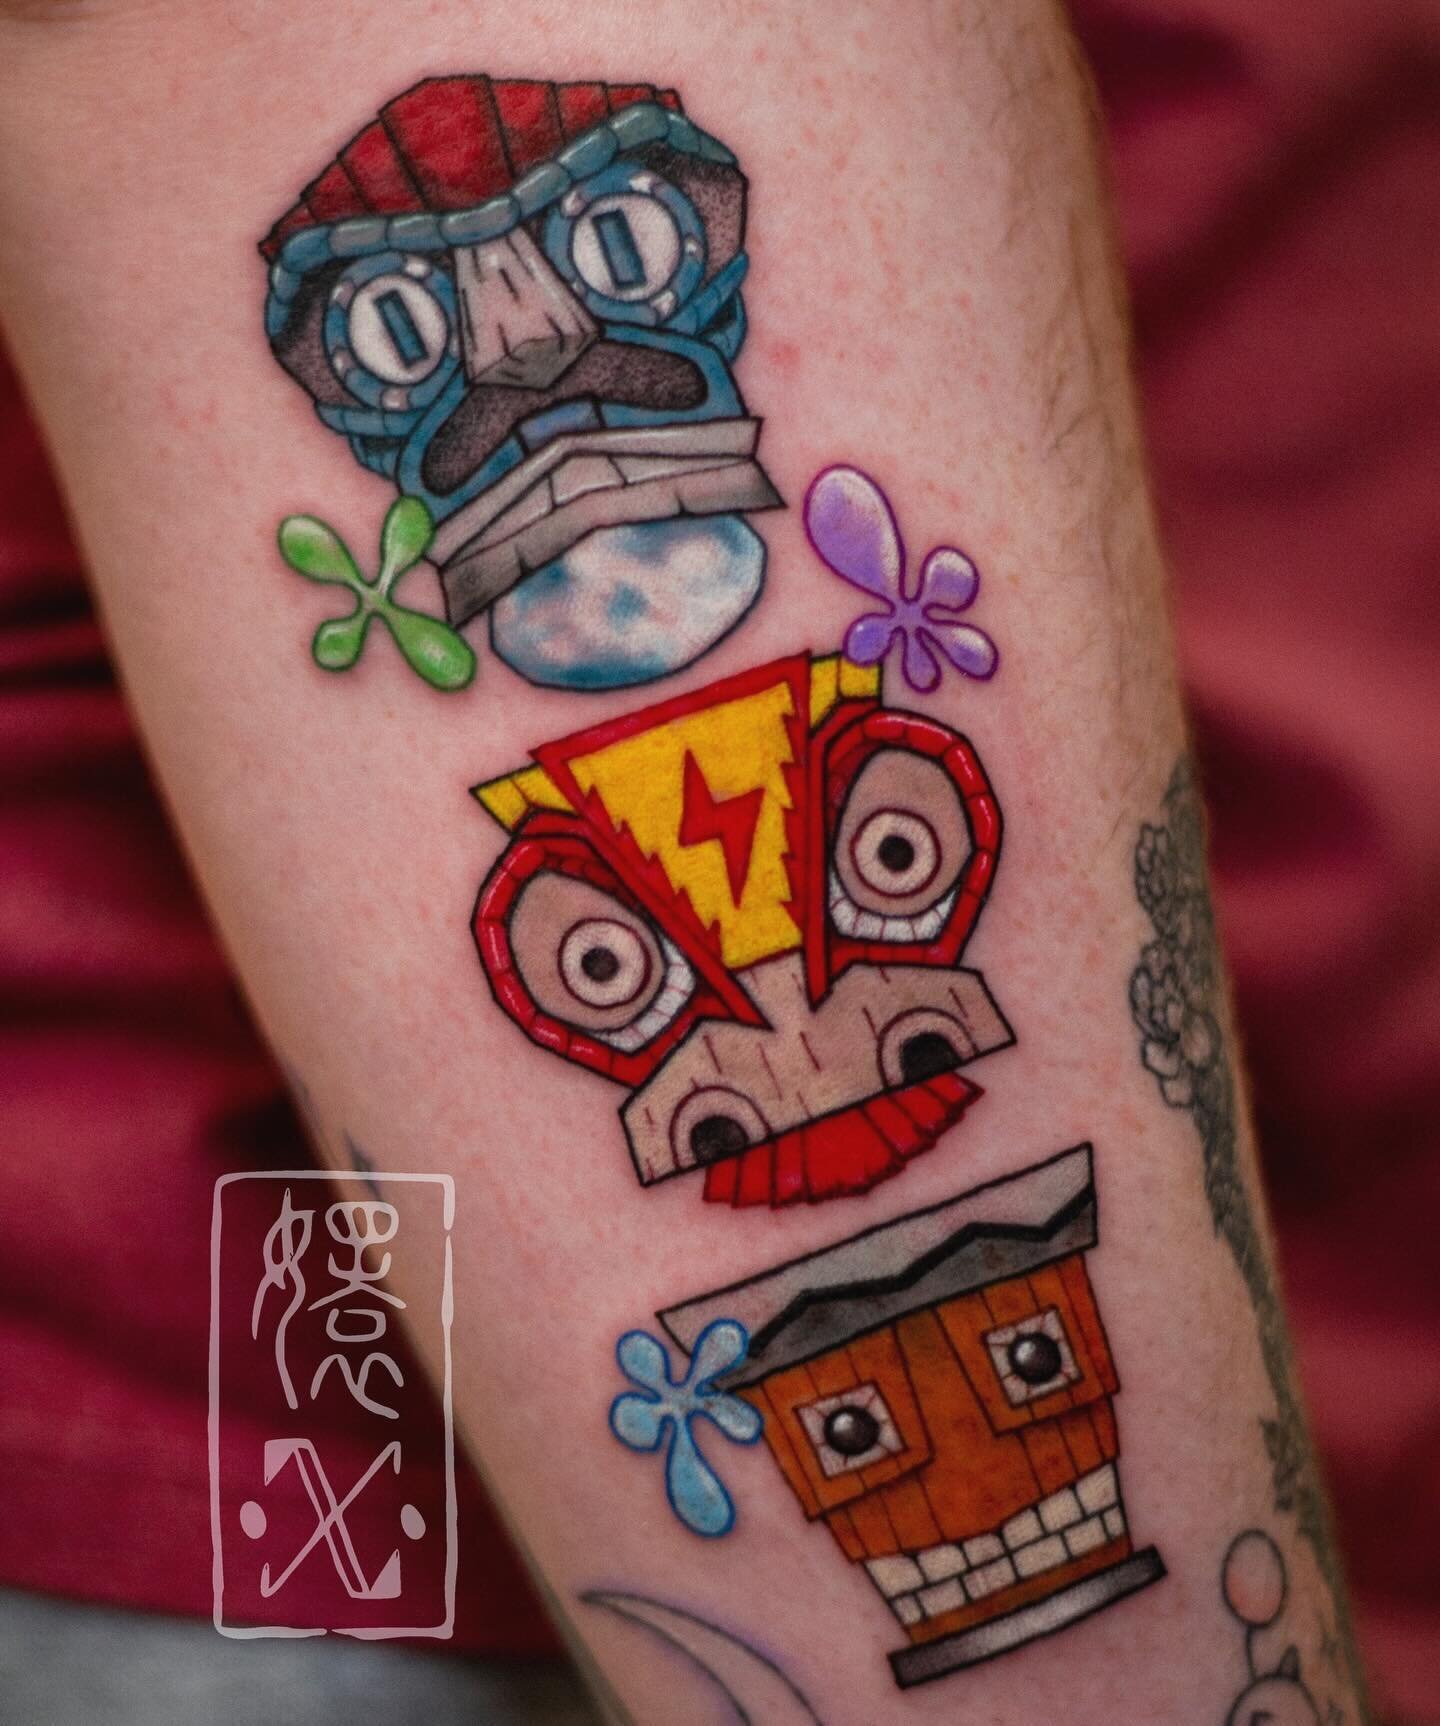 SPONGEBOB BATTLE FOR BIKINI BOTTOM 👙 🍍 I didn&rsquo;t realize how many nostalgic niche games there are until I meet someone and you go &ldquo;OHHH I REMEMBER THAT&rdquo;. 

Thank you @adam_selph for the prized arm 🫡 

BRO can someone get a Freddi 